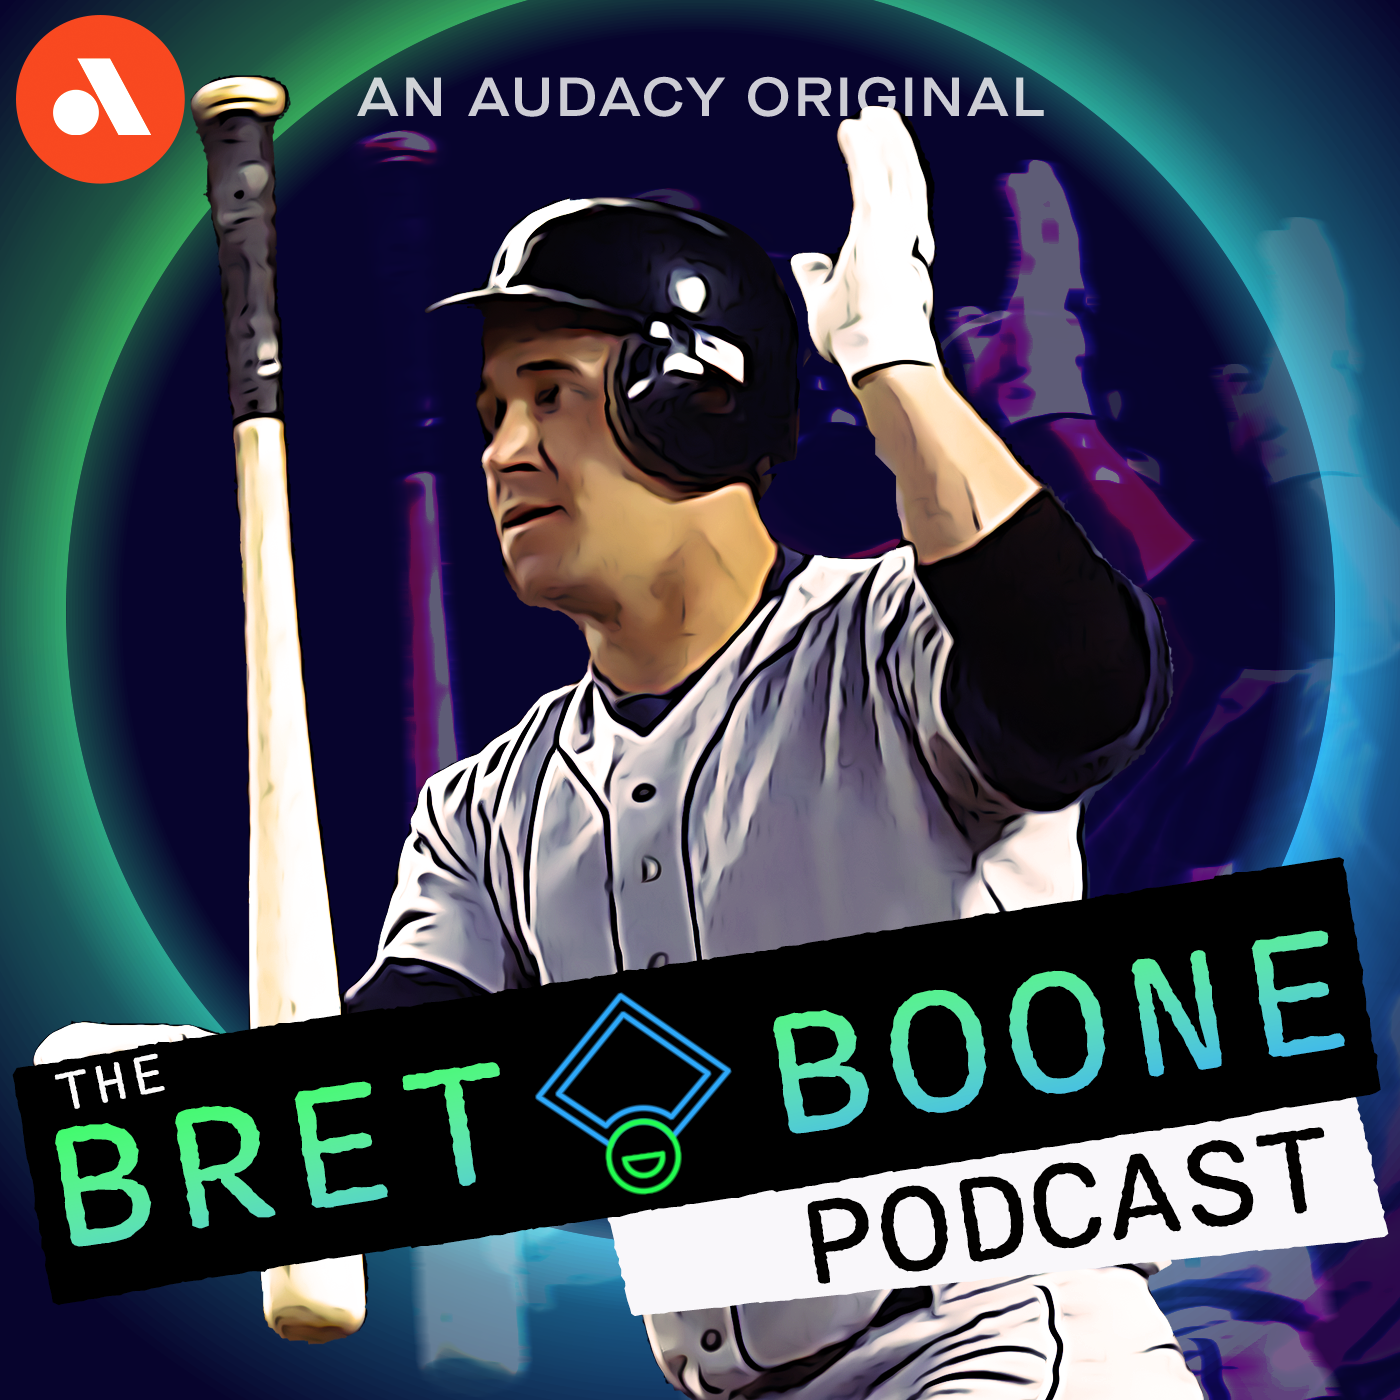 What Was It Like Working With John Sterling? | 'The Bret Boone Podcast'